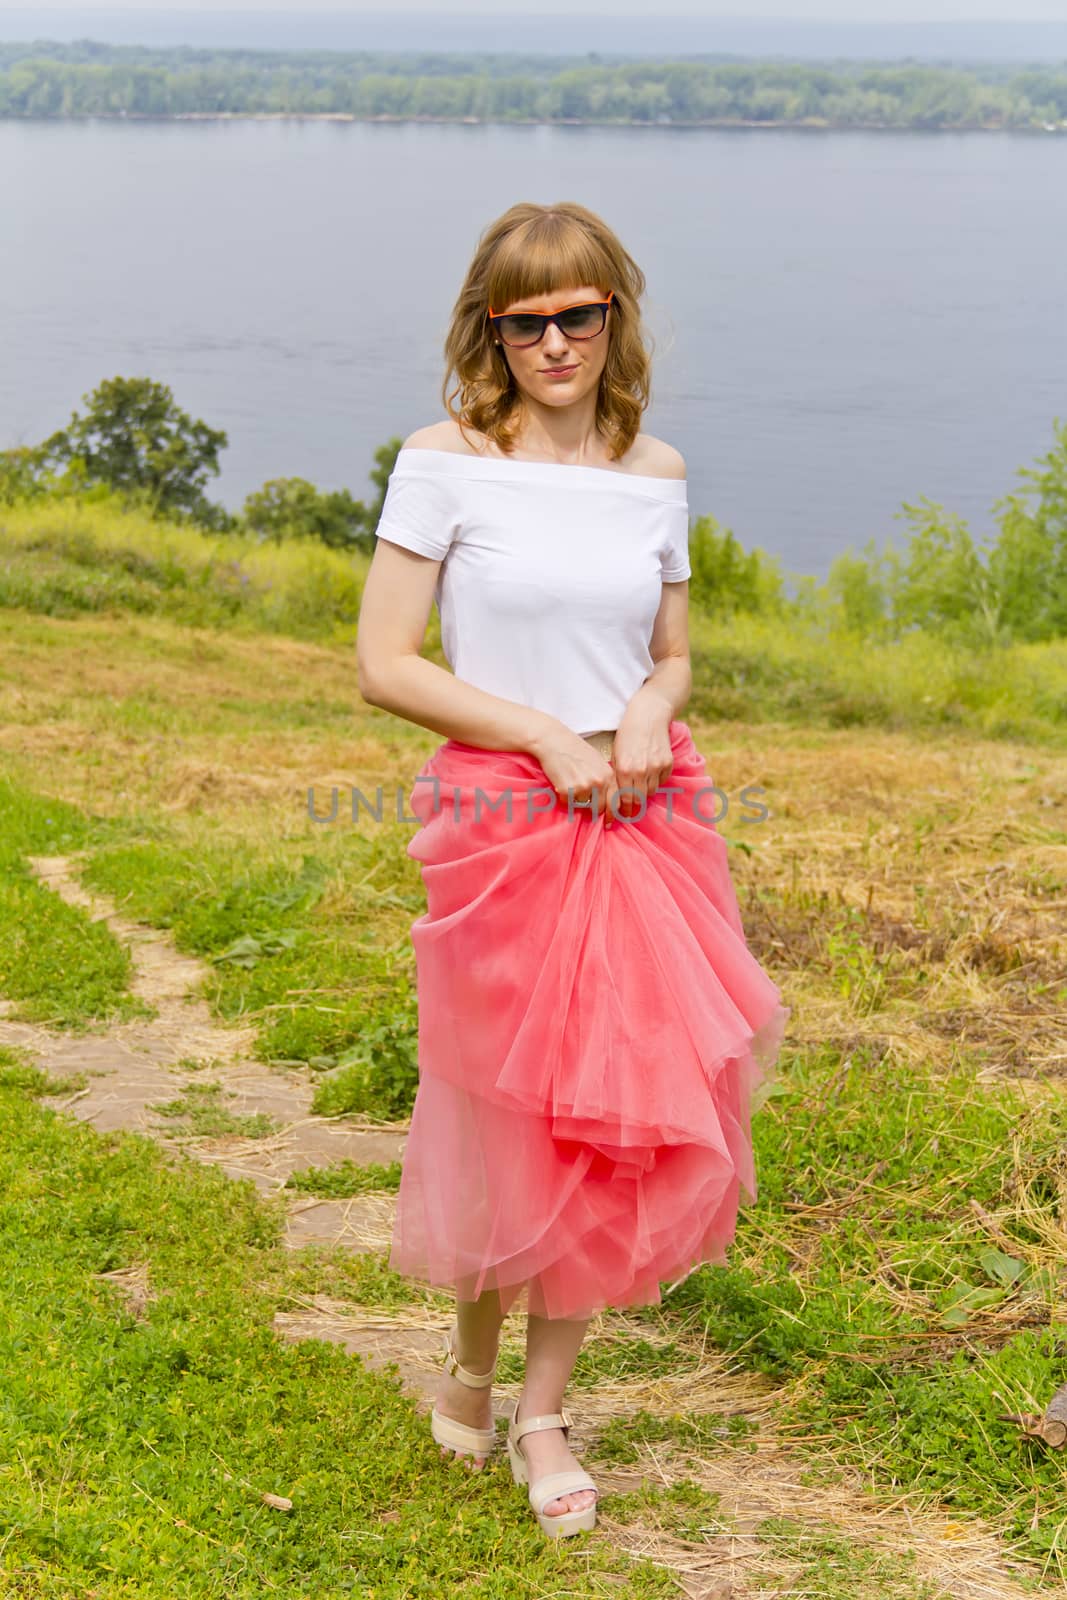 Young girl in sunglasses and pink skirt walking on river embankment